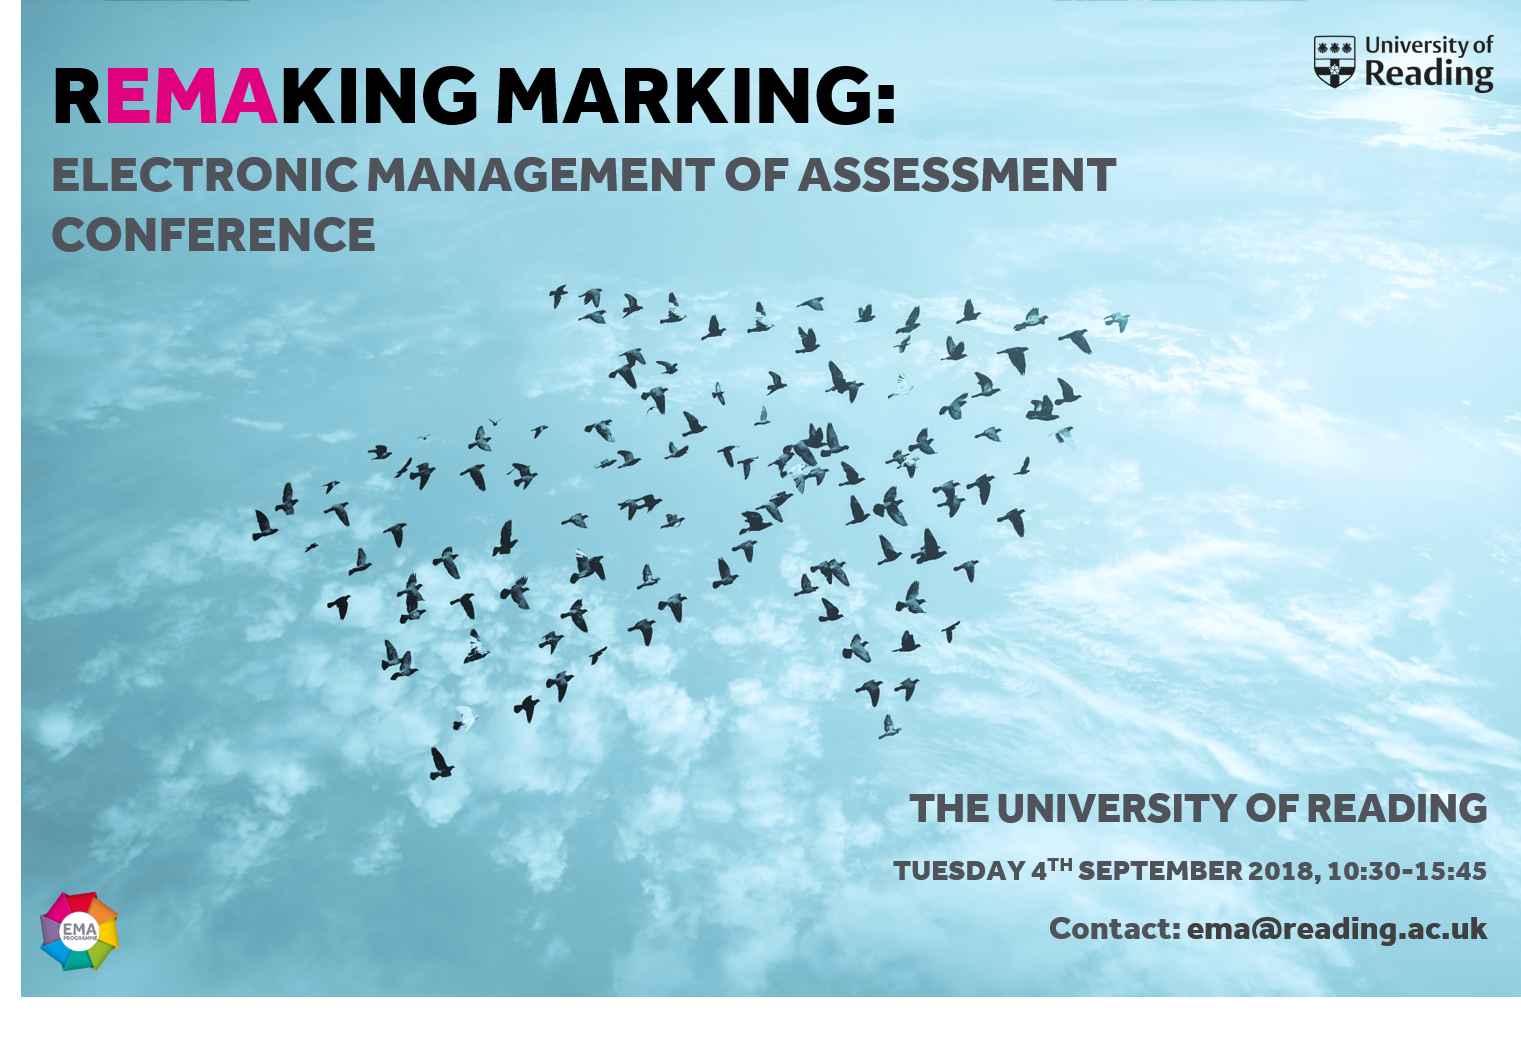 Remaking Marking Conference poster, displaying birds migrating in an arrow formation